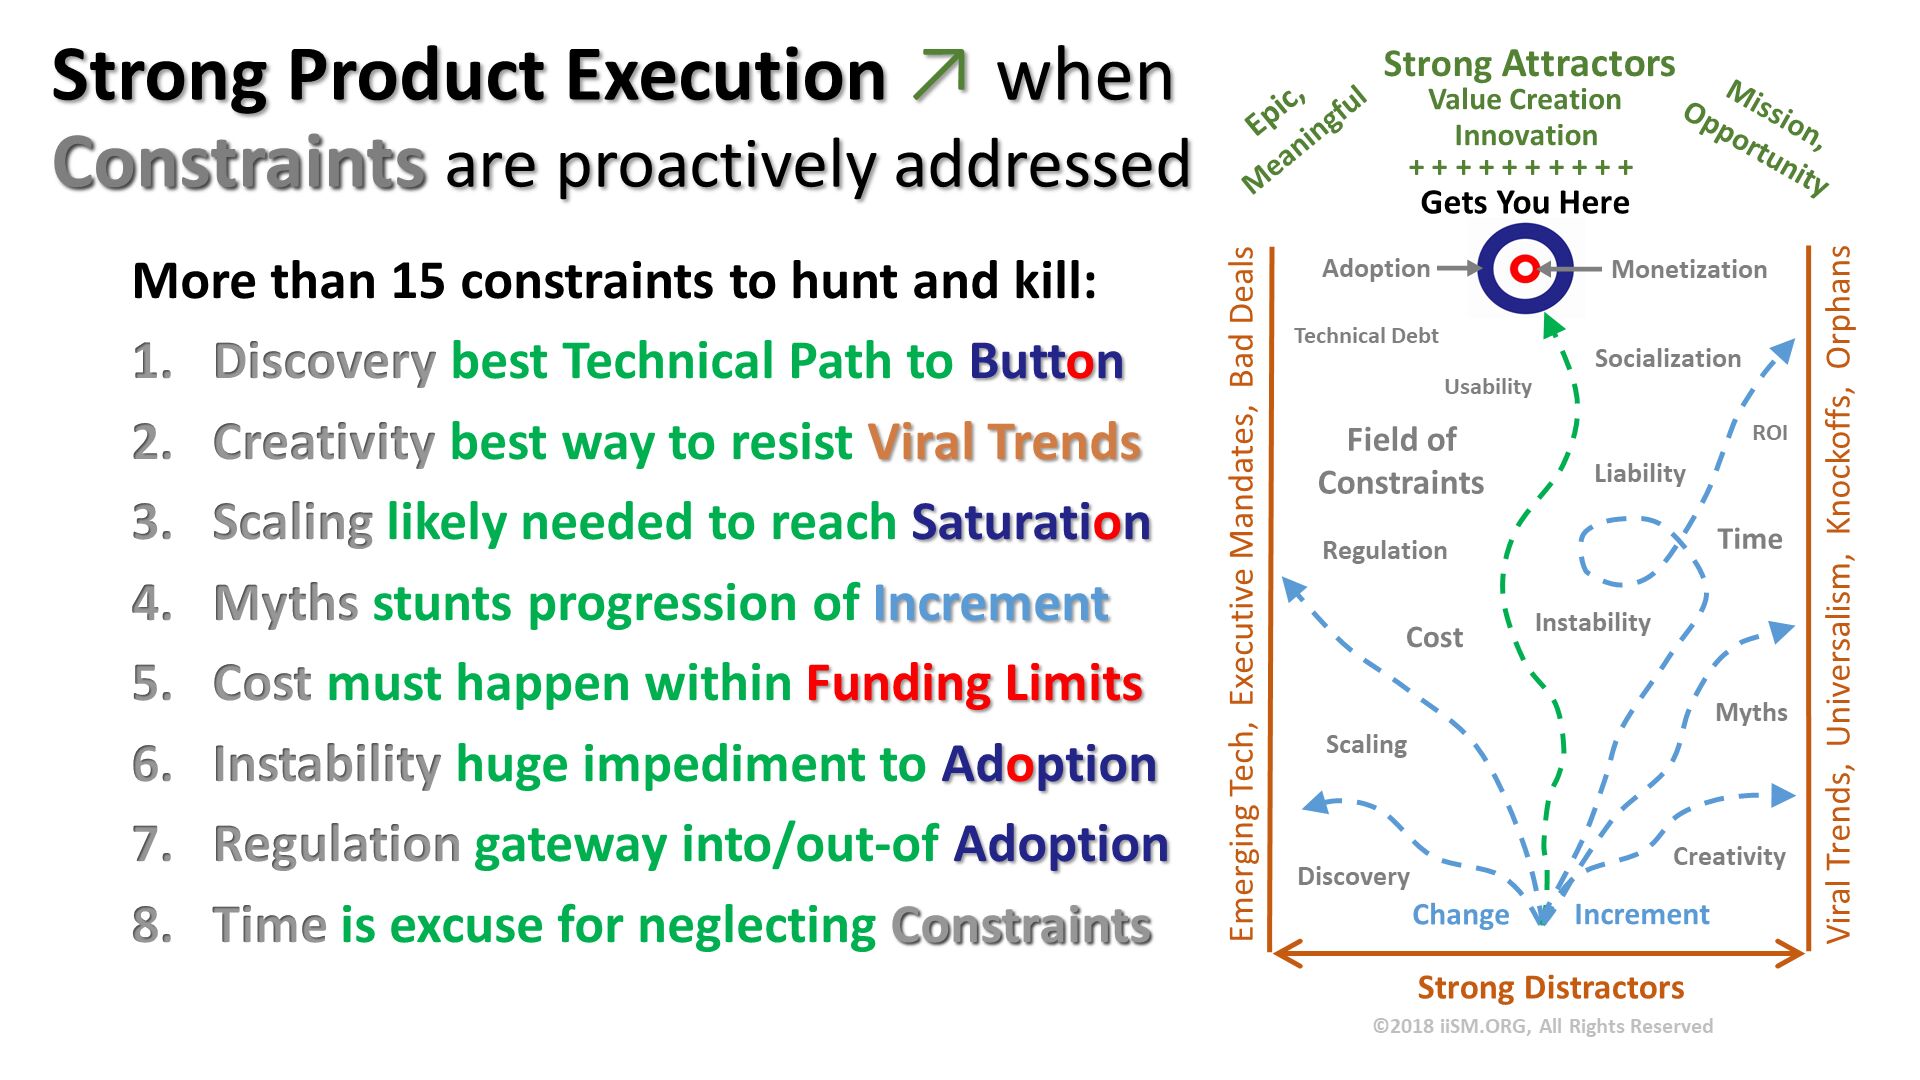 Strong Product Execution ↗ whenConstraints are proactively addressed. More than 15 constraints to hunt and kill:
Discovery best Technical Path to Button
Creativity best way to resist Viral Trends
Scaling likely needed to reach Saturation 
Myths stunts progression of Increment
Cost must happen within Funding Limits
Instability huge impediment to Adoption
Regulation gateway into/out-of Adoption
Time is excuse for neglecting Constraints  

. 